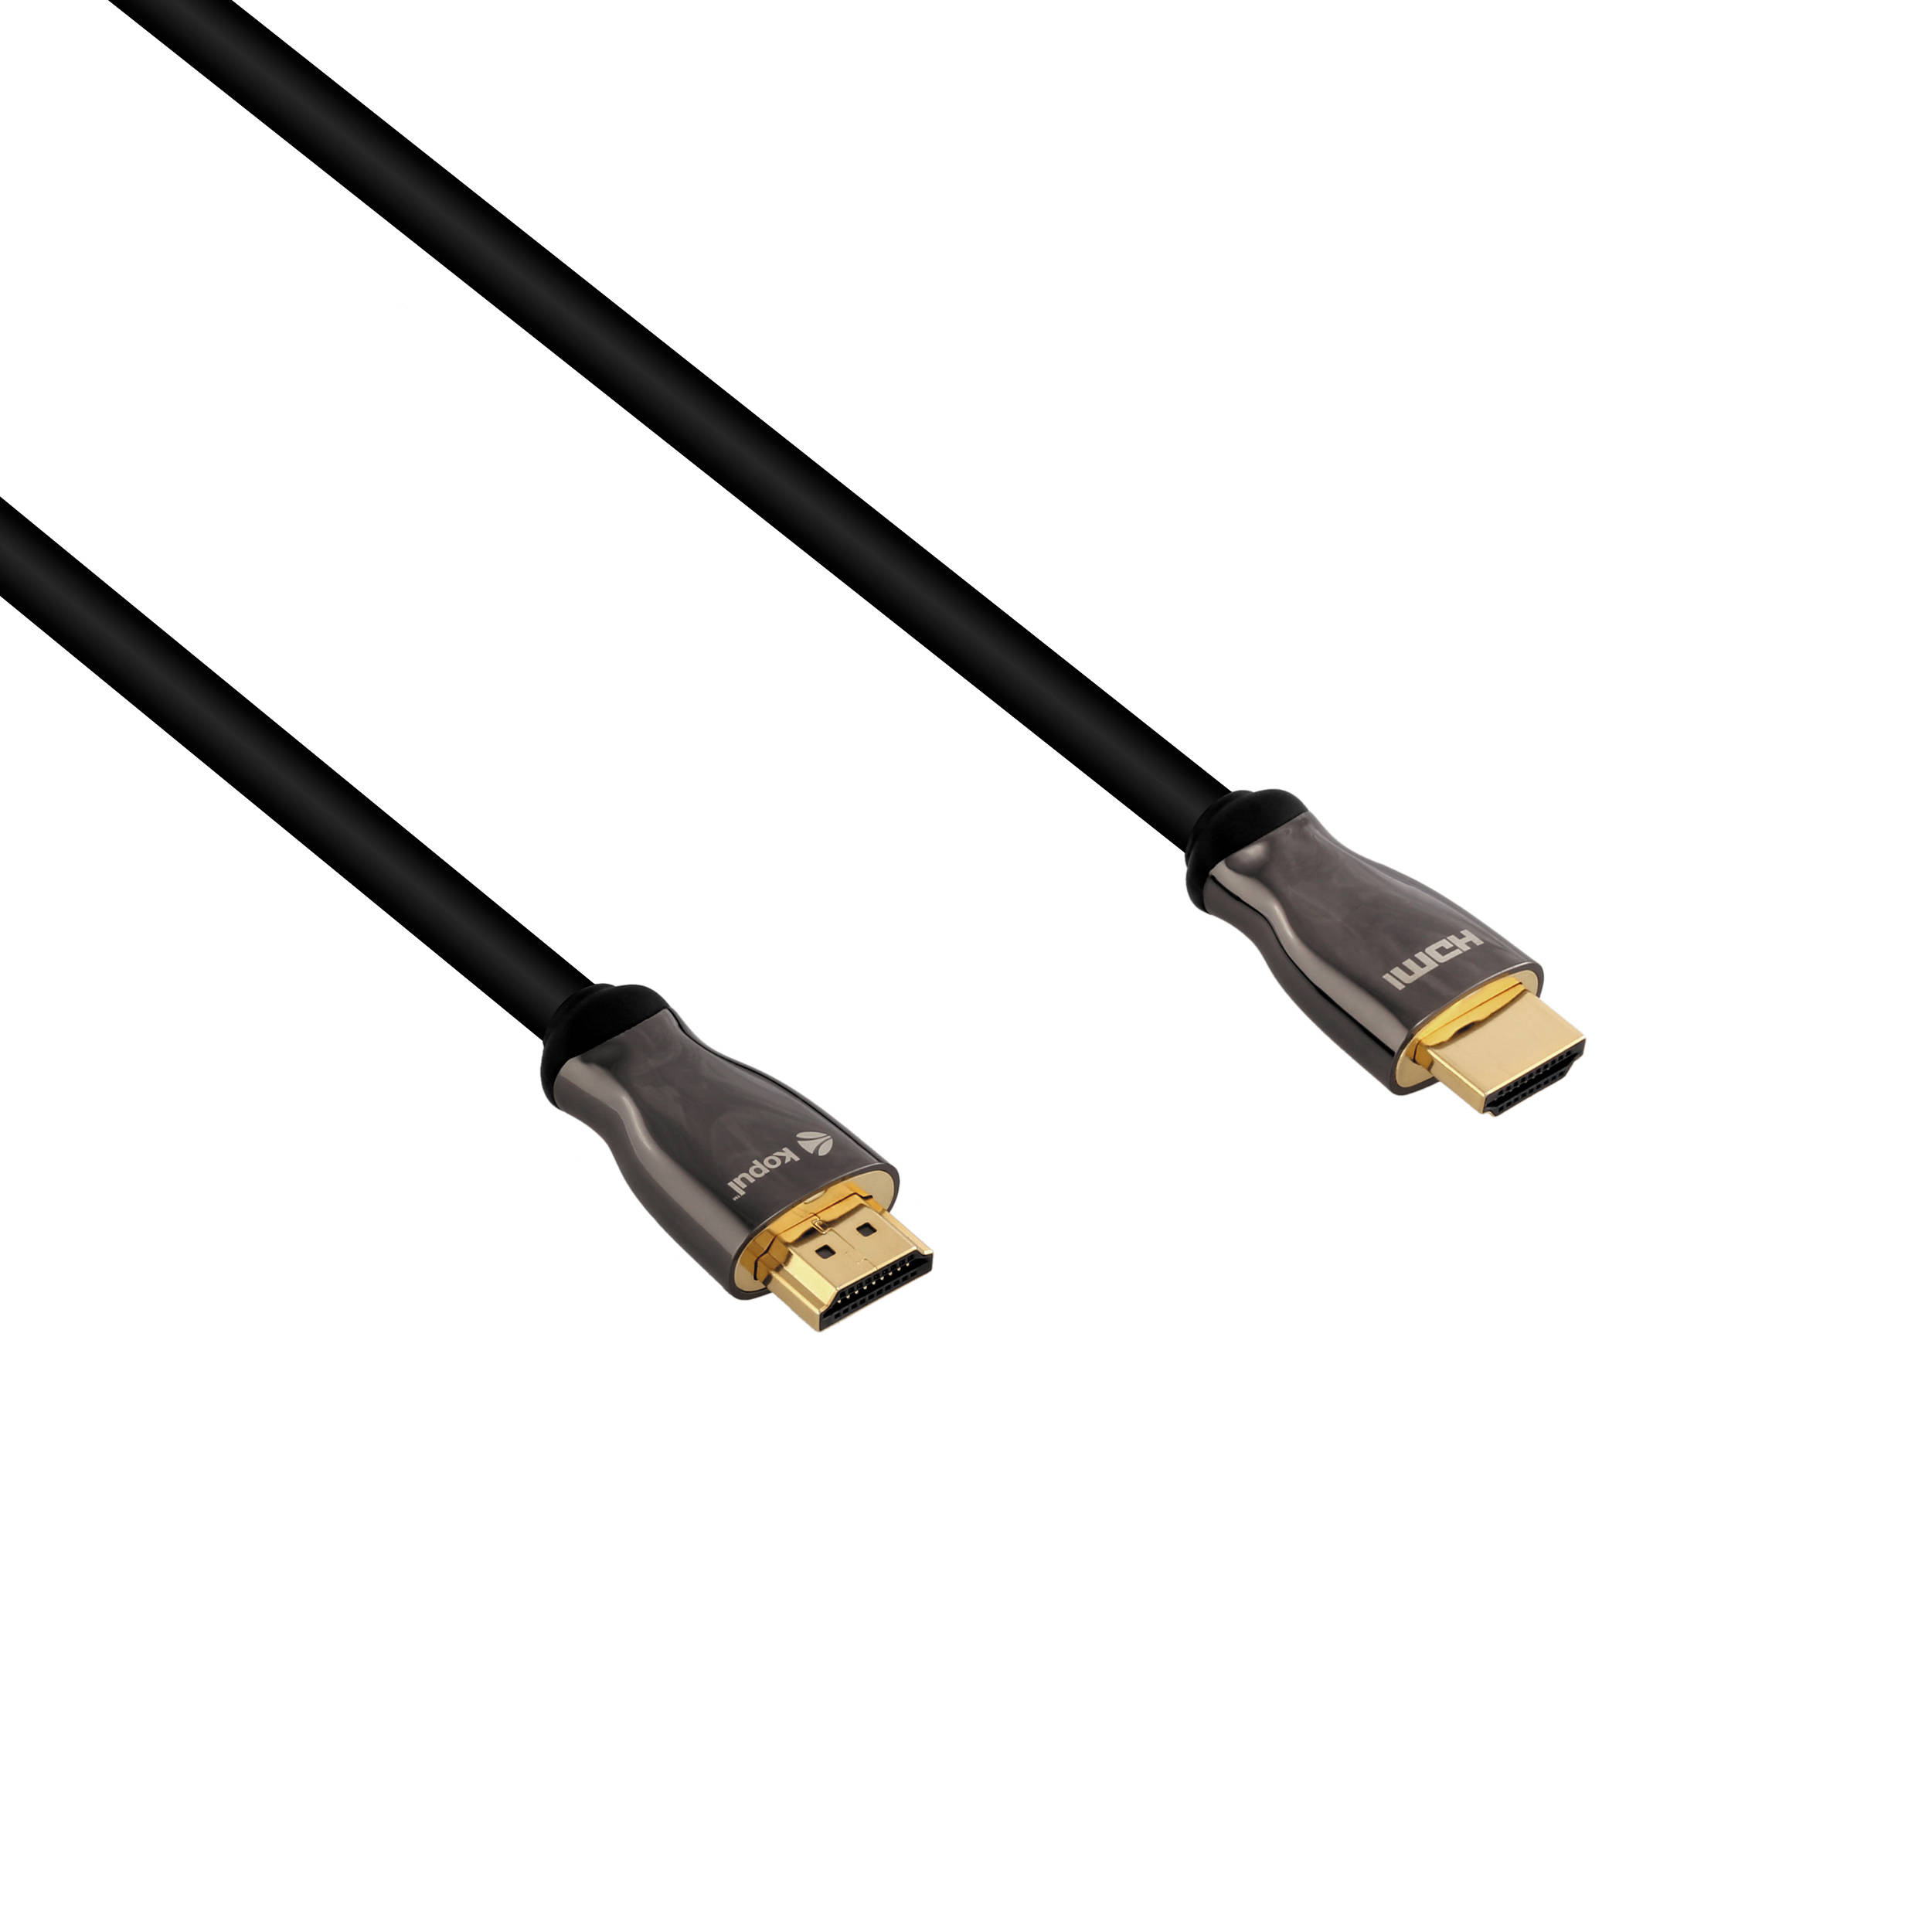 Kopul HDA-506 Premium High-Speed HDMI Cable with Ethernet (6')